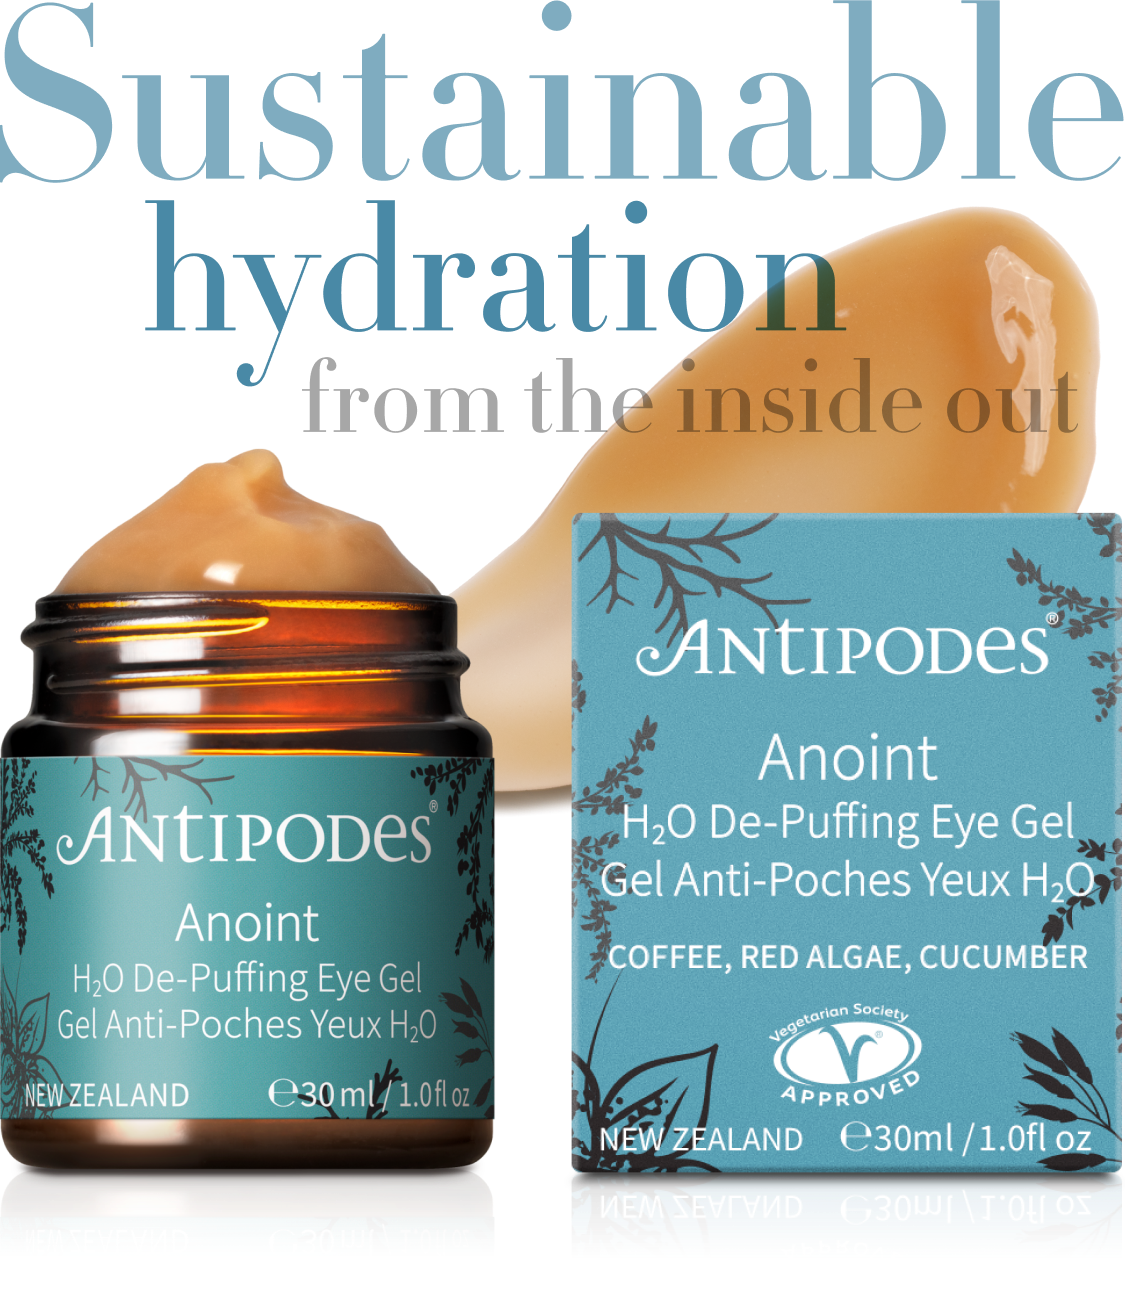 Sustainable hydration from the inside out